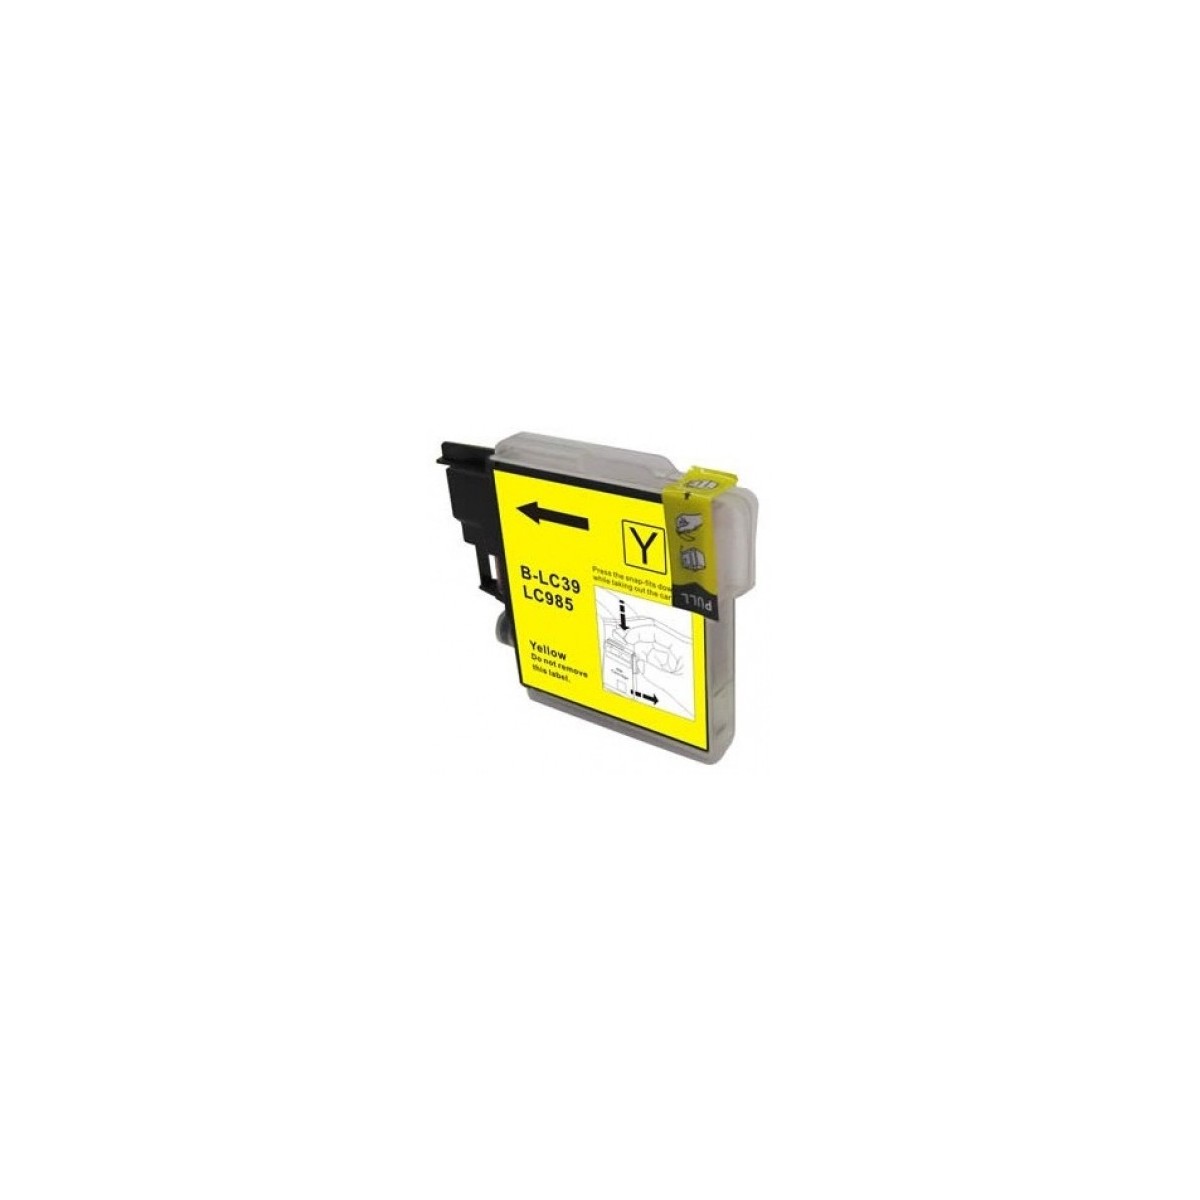 1 Cartouche compatible avec Brother LC-39/LC975/LC985 Yellow